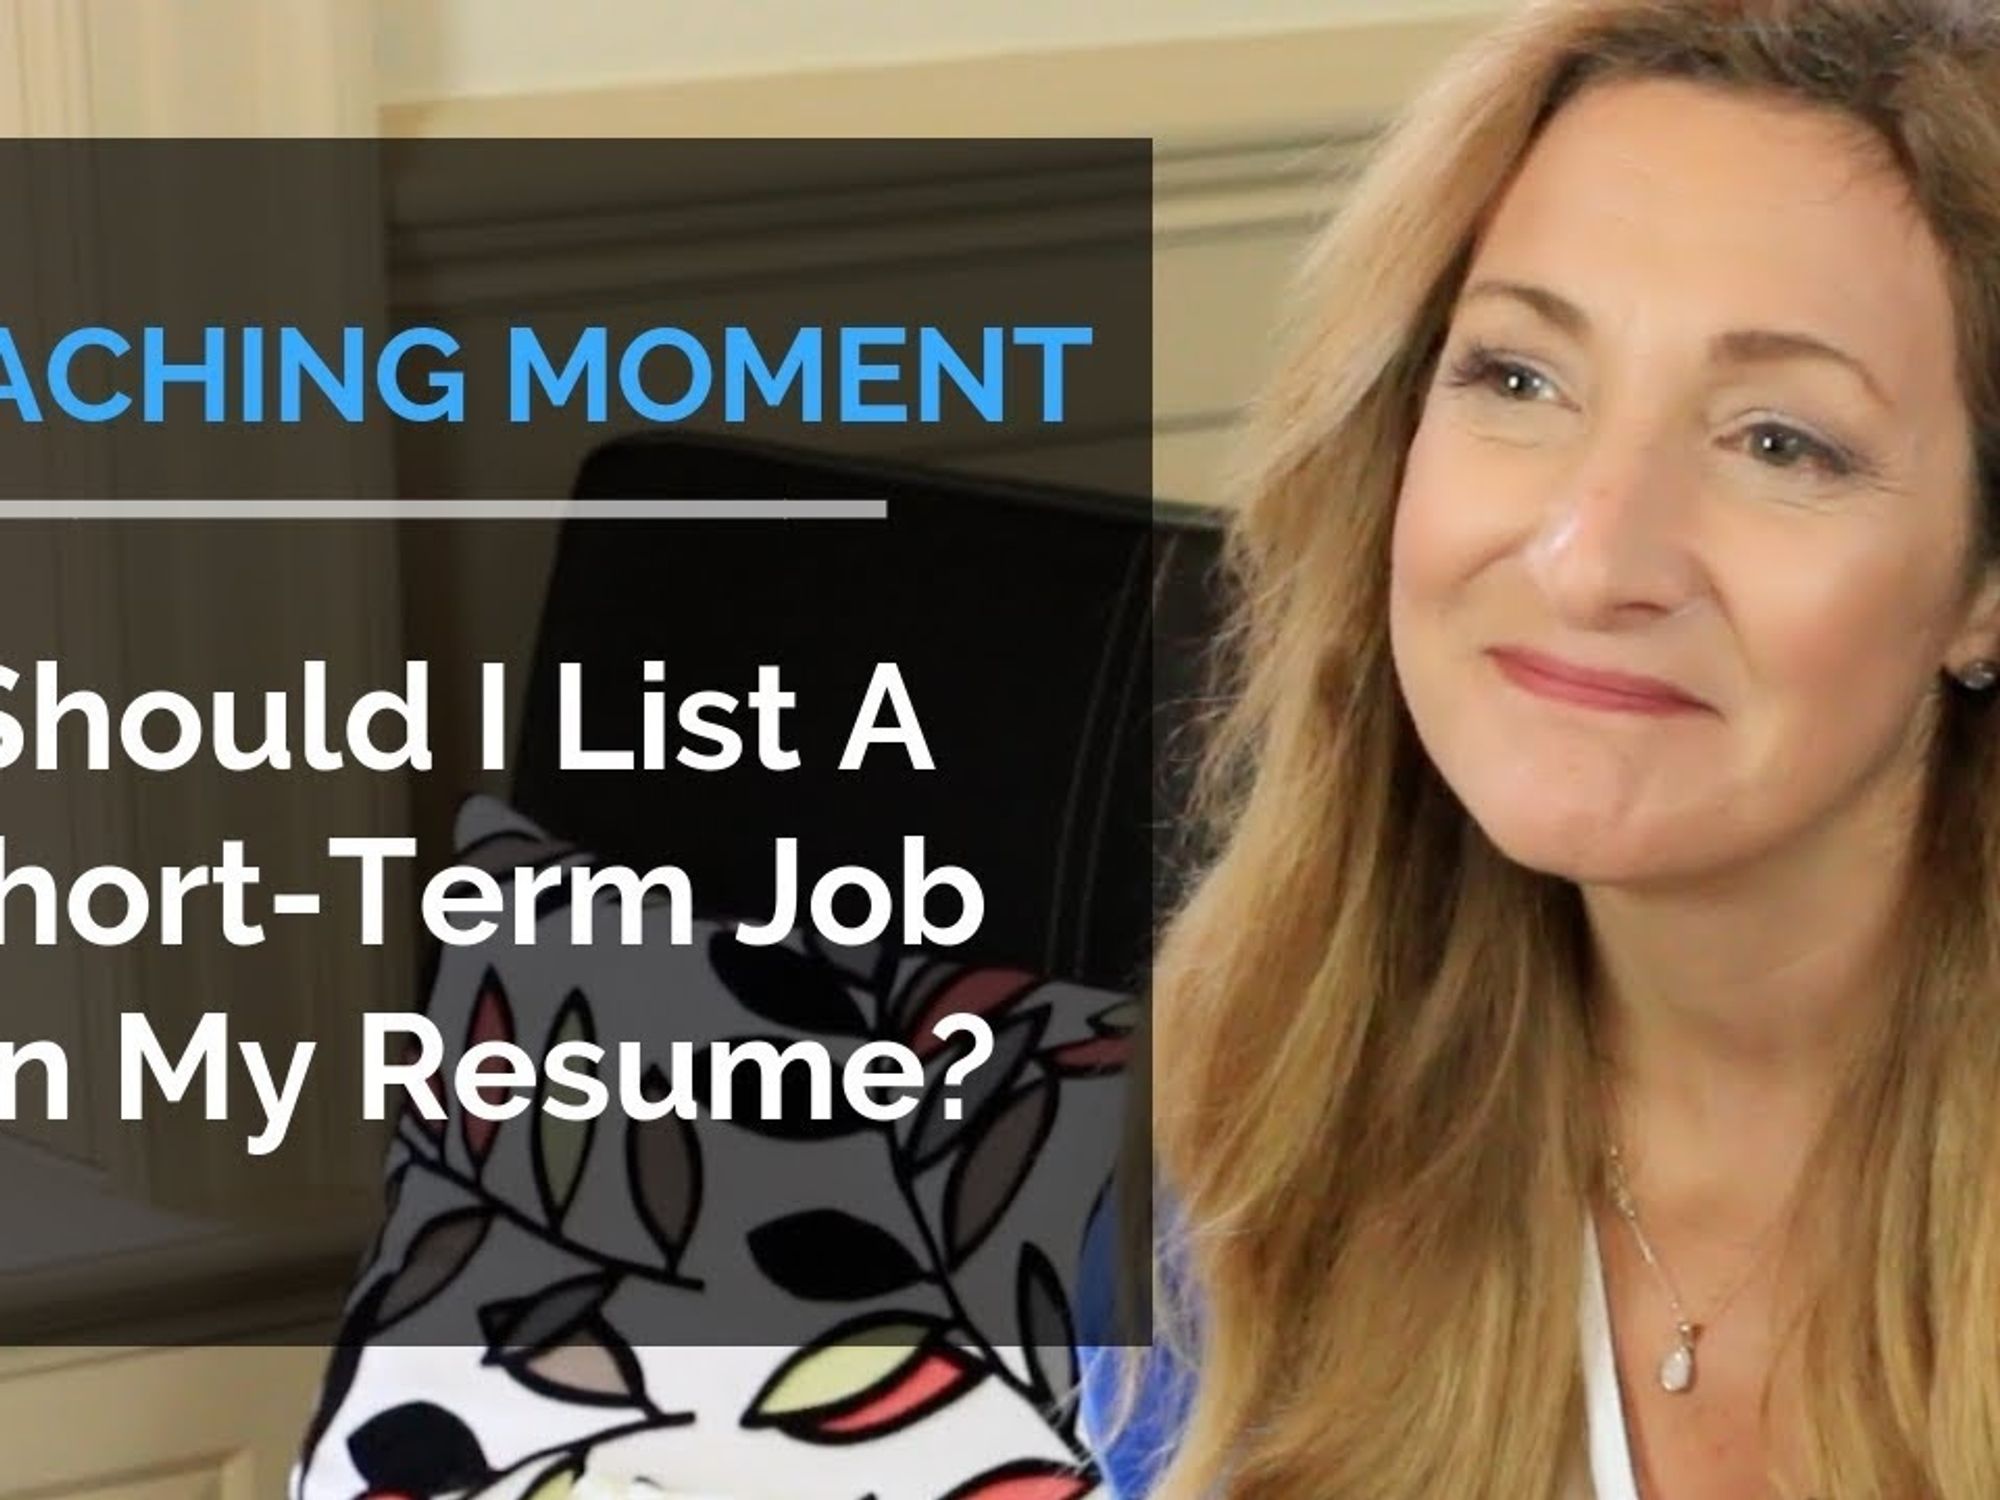 Listing A Short-Term Job: Will It Help Or Hurt Your Career?